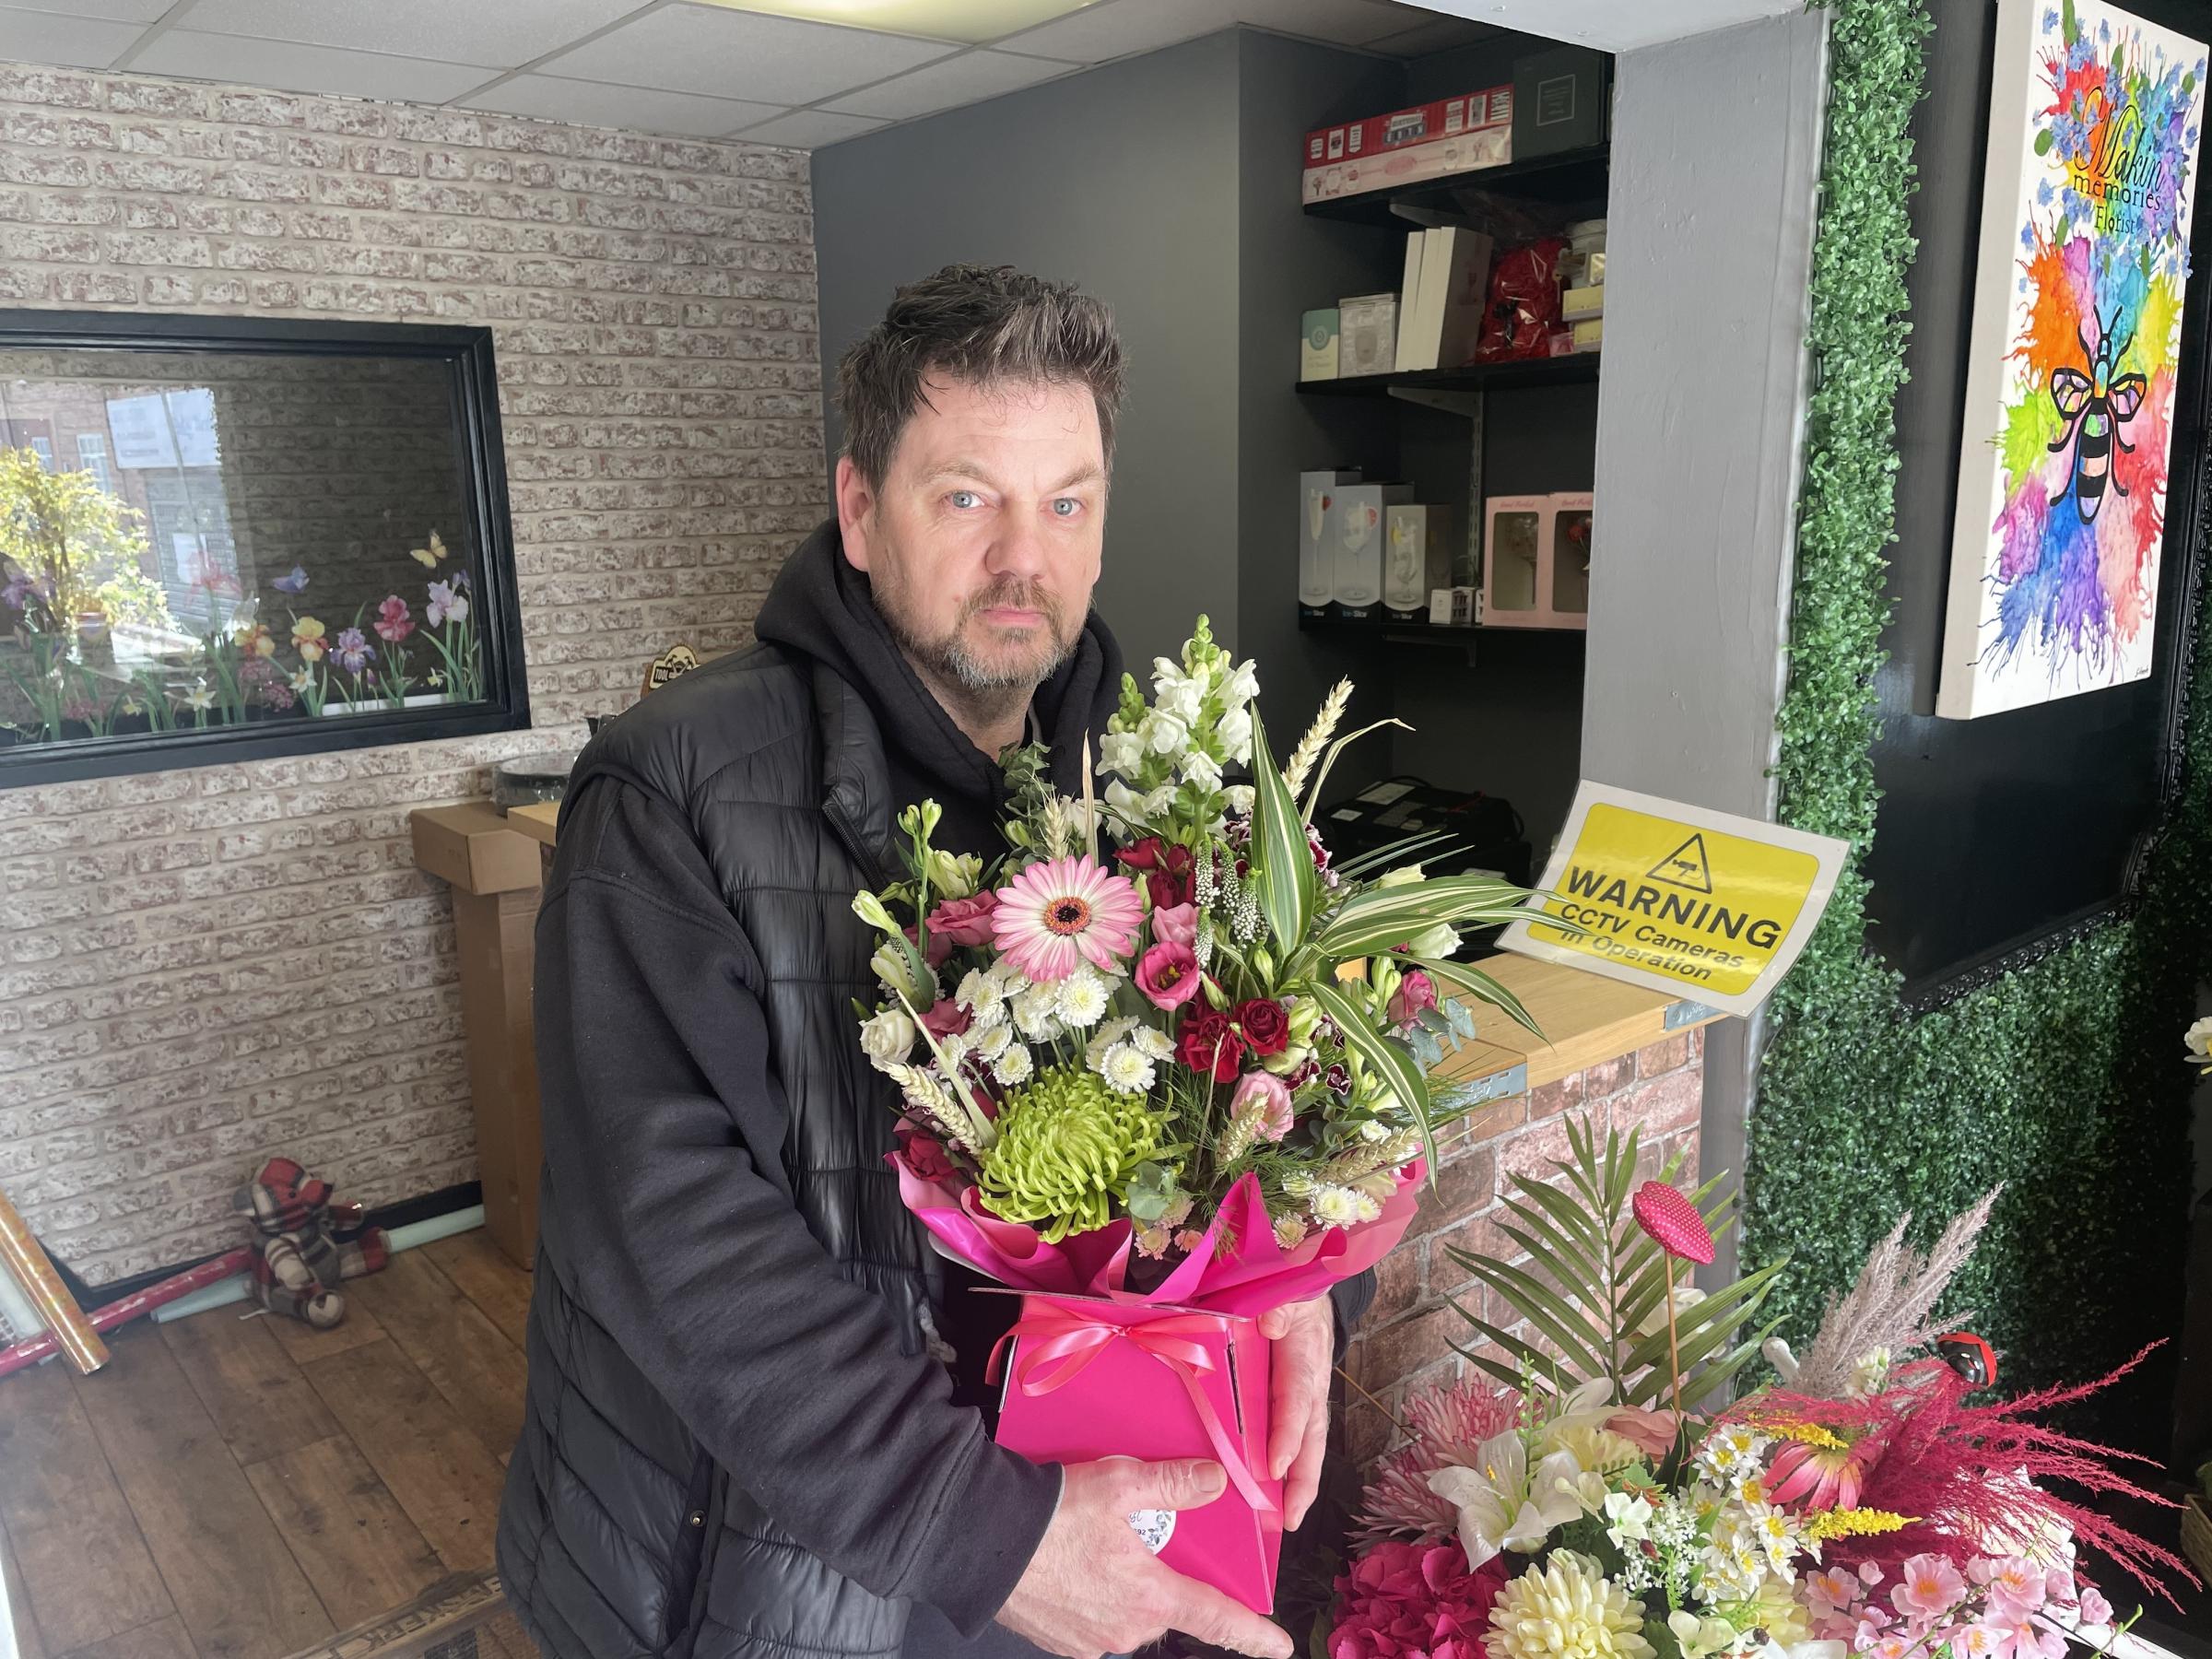 Florist Ron Makin said he was not hopeful that his business would survive as shoppers had been driven away by major development work in the town centre